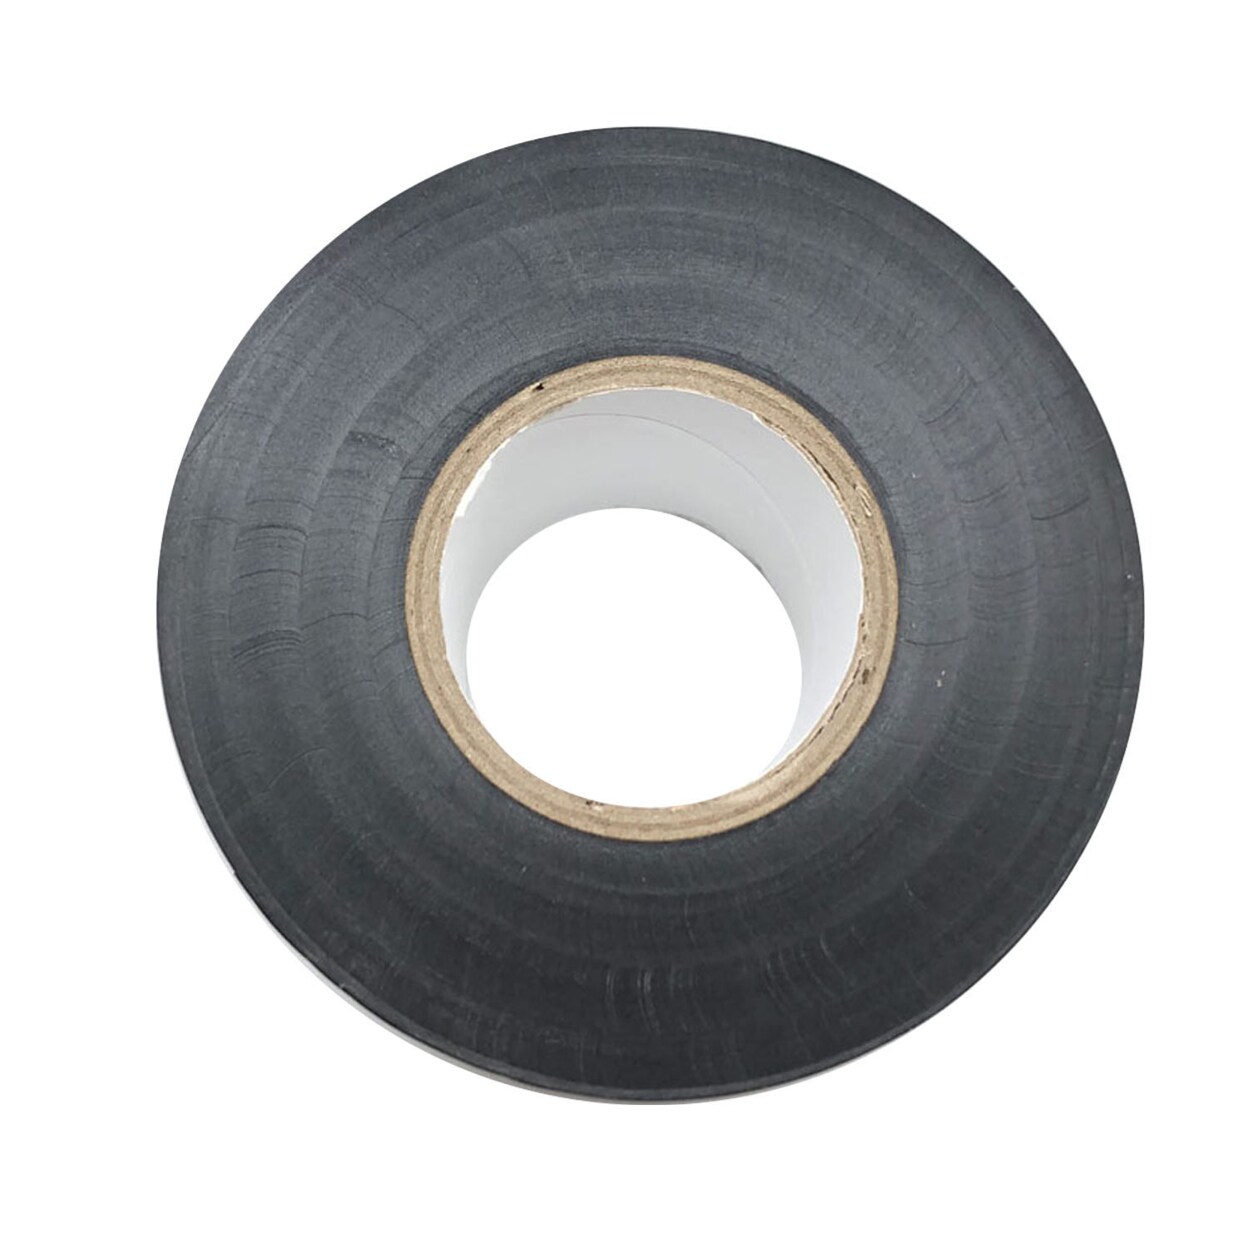 Taj Tools Packing Tape Roll - Rubber Adhesive Heavy Duty Tape for